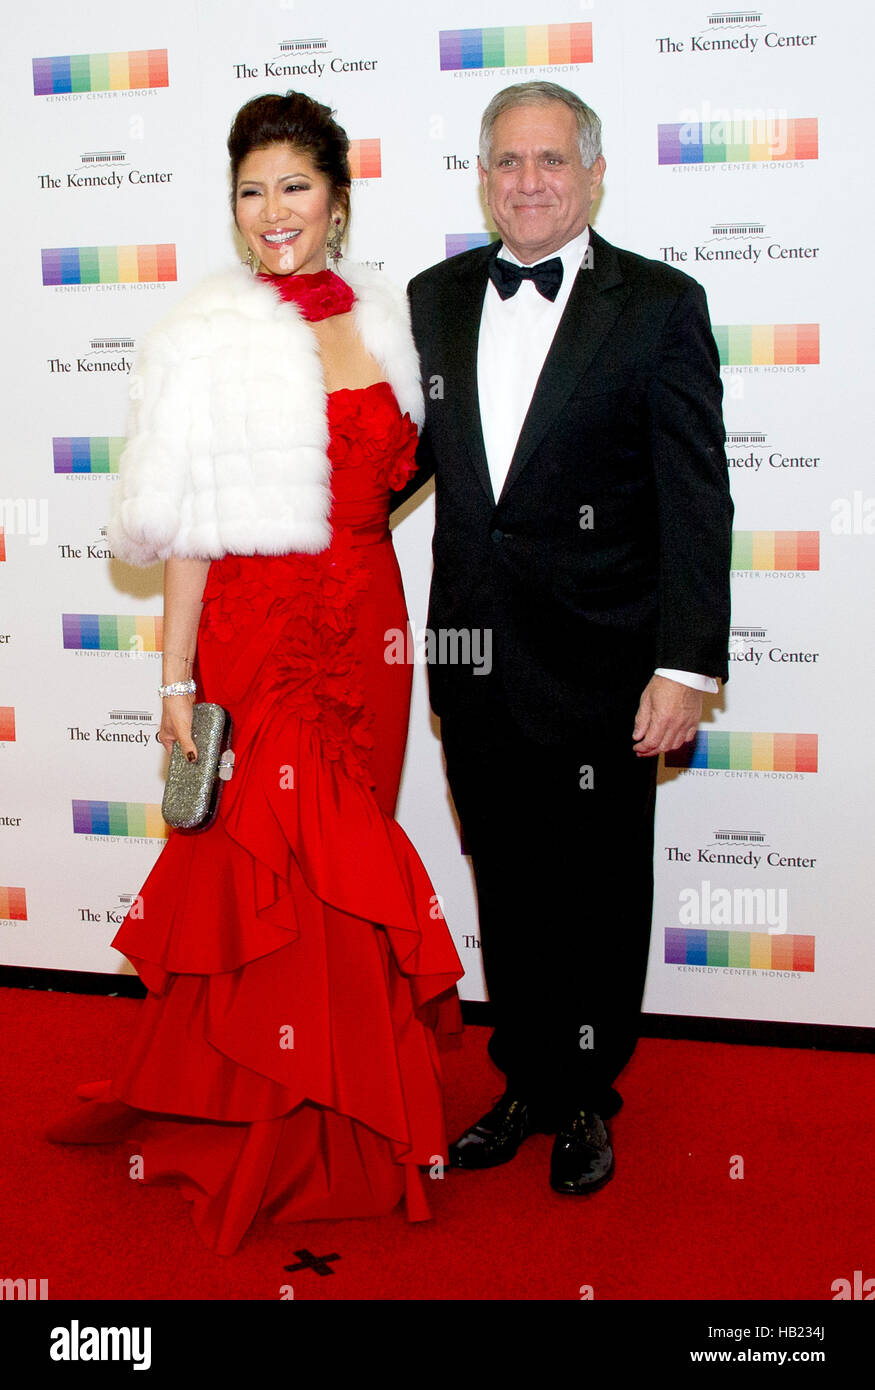 Julie Chen and Les Moonves arrive for the formal Artist's Dinner honoring the recipients of the 39th Annual Kennedy Center Honors hosted by United States Secretary of State John F. Kerry at the U.S. Department of State in Washington, DC on Saturday, December 3, 2016. The 2016 honorees are: Argentine pianist Martha Argerich; rock band the Eagles; screen and stage actor Al Pacino; gospel and blues singer Mavis Staples; and musician James Taylor. Credit: Ron Sachs/Pool via CNP - NO WIRE SERVICE - Photo: Ron Sachs/Consolidated/dpa Stock Photo